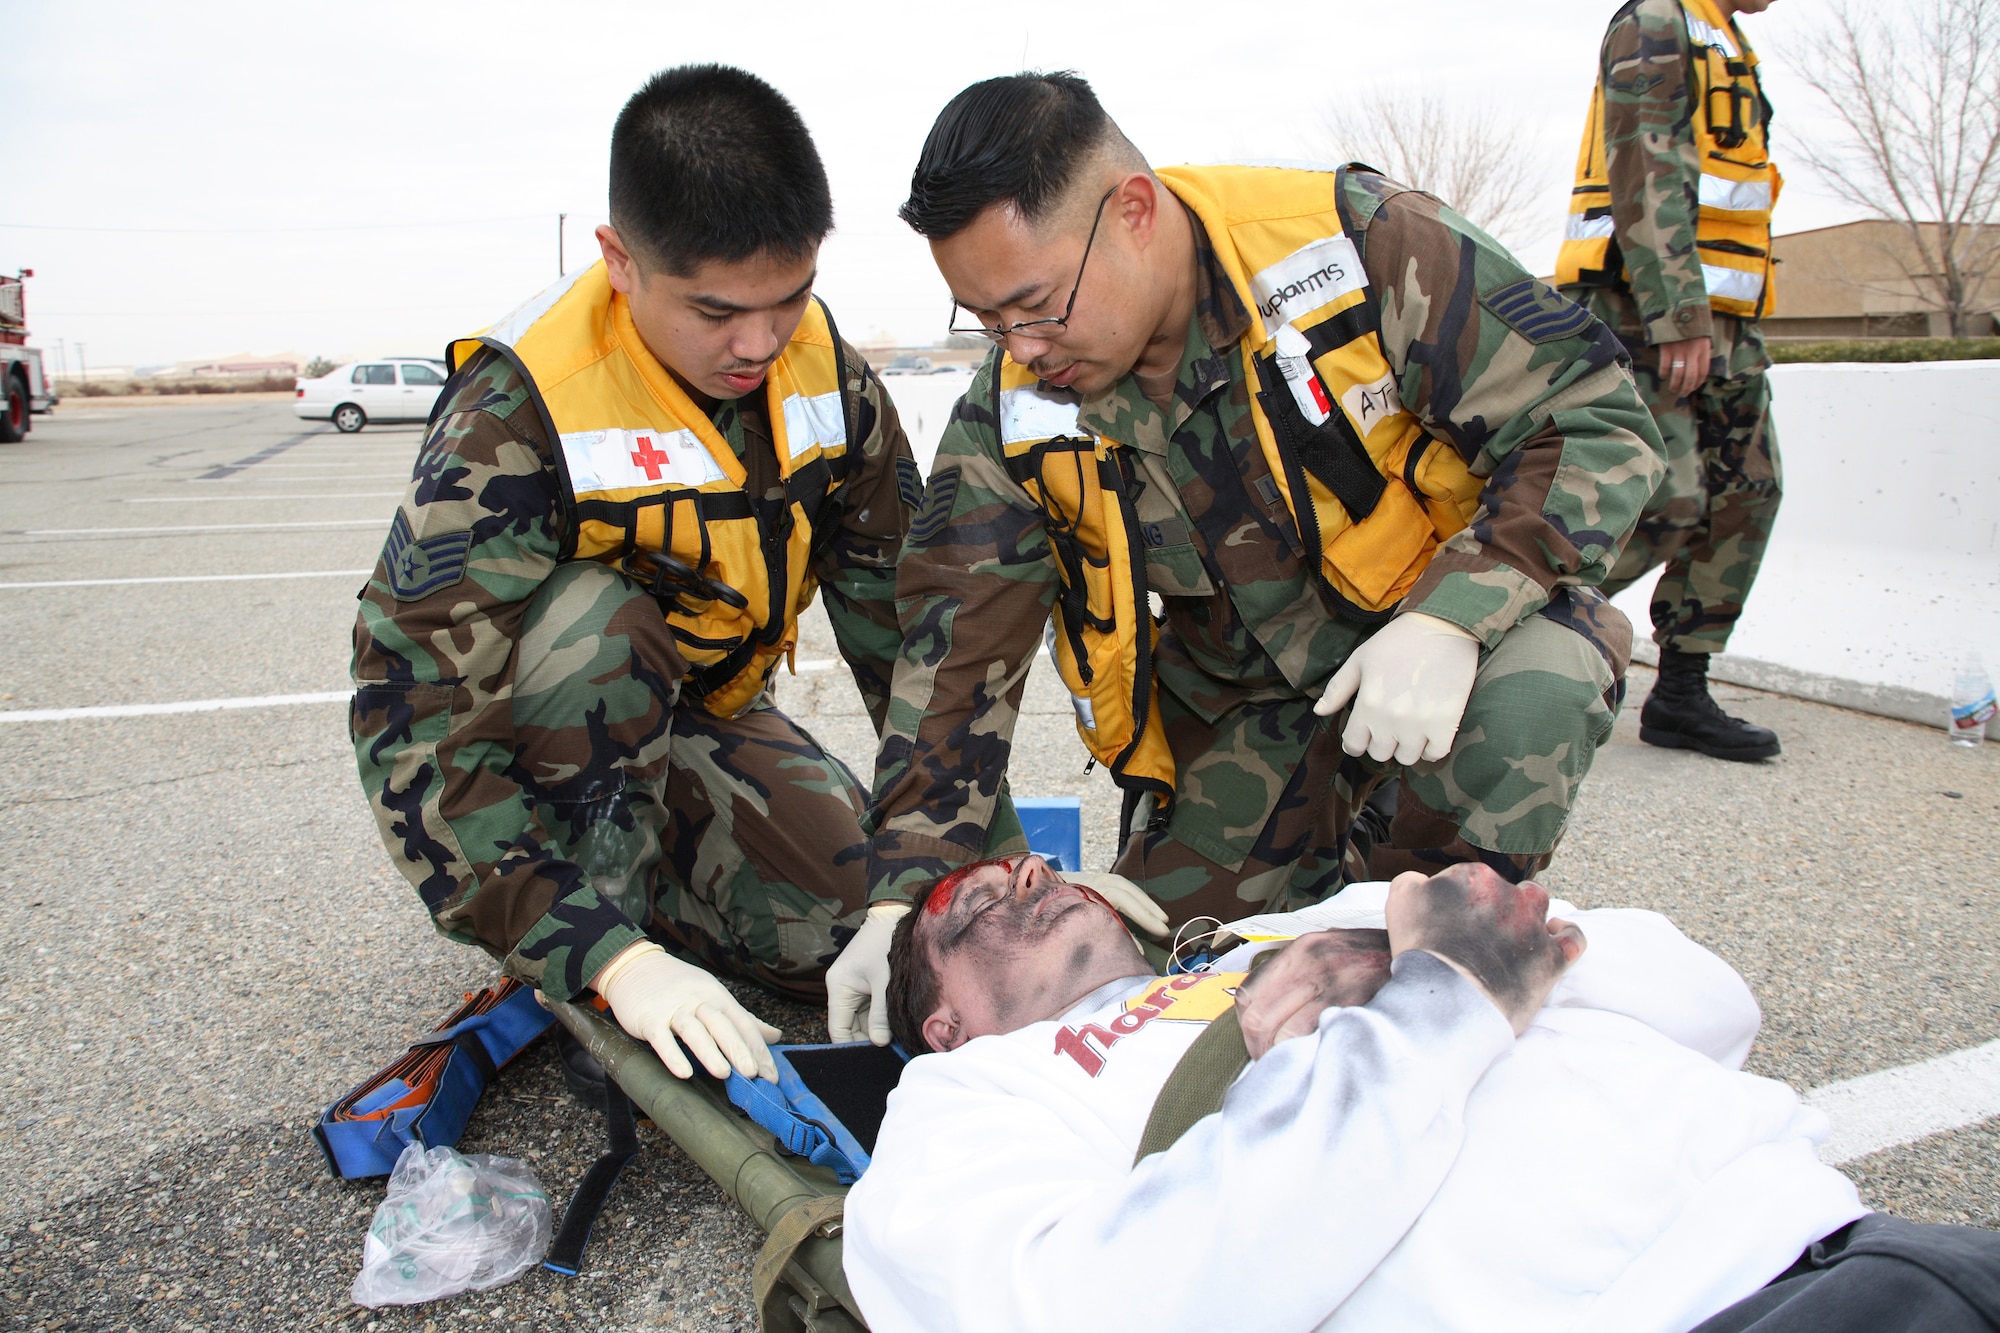 Edwards emergency medical technicians perform medical aid to a "victim" during the emergency management exercise portion of the ORE's Phase I Jan. 30, 2007. (Photo by Jet Fabara)